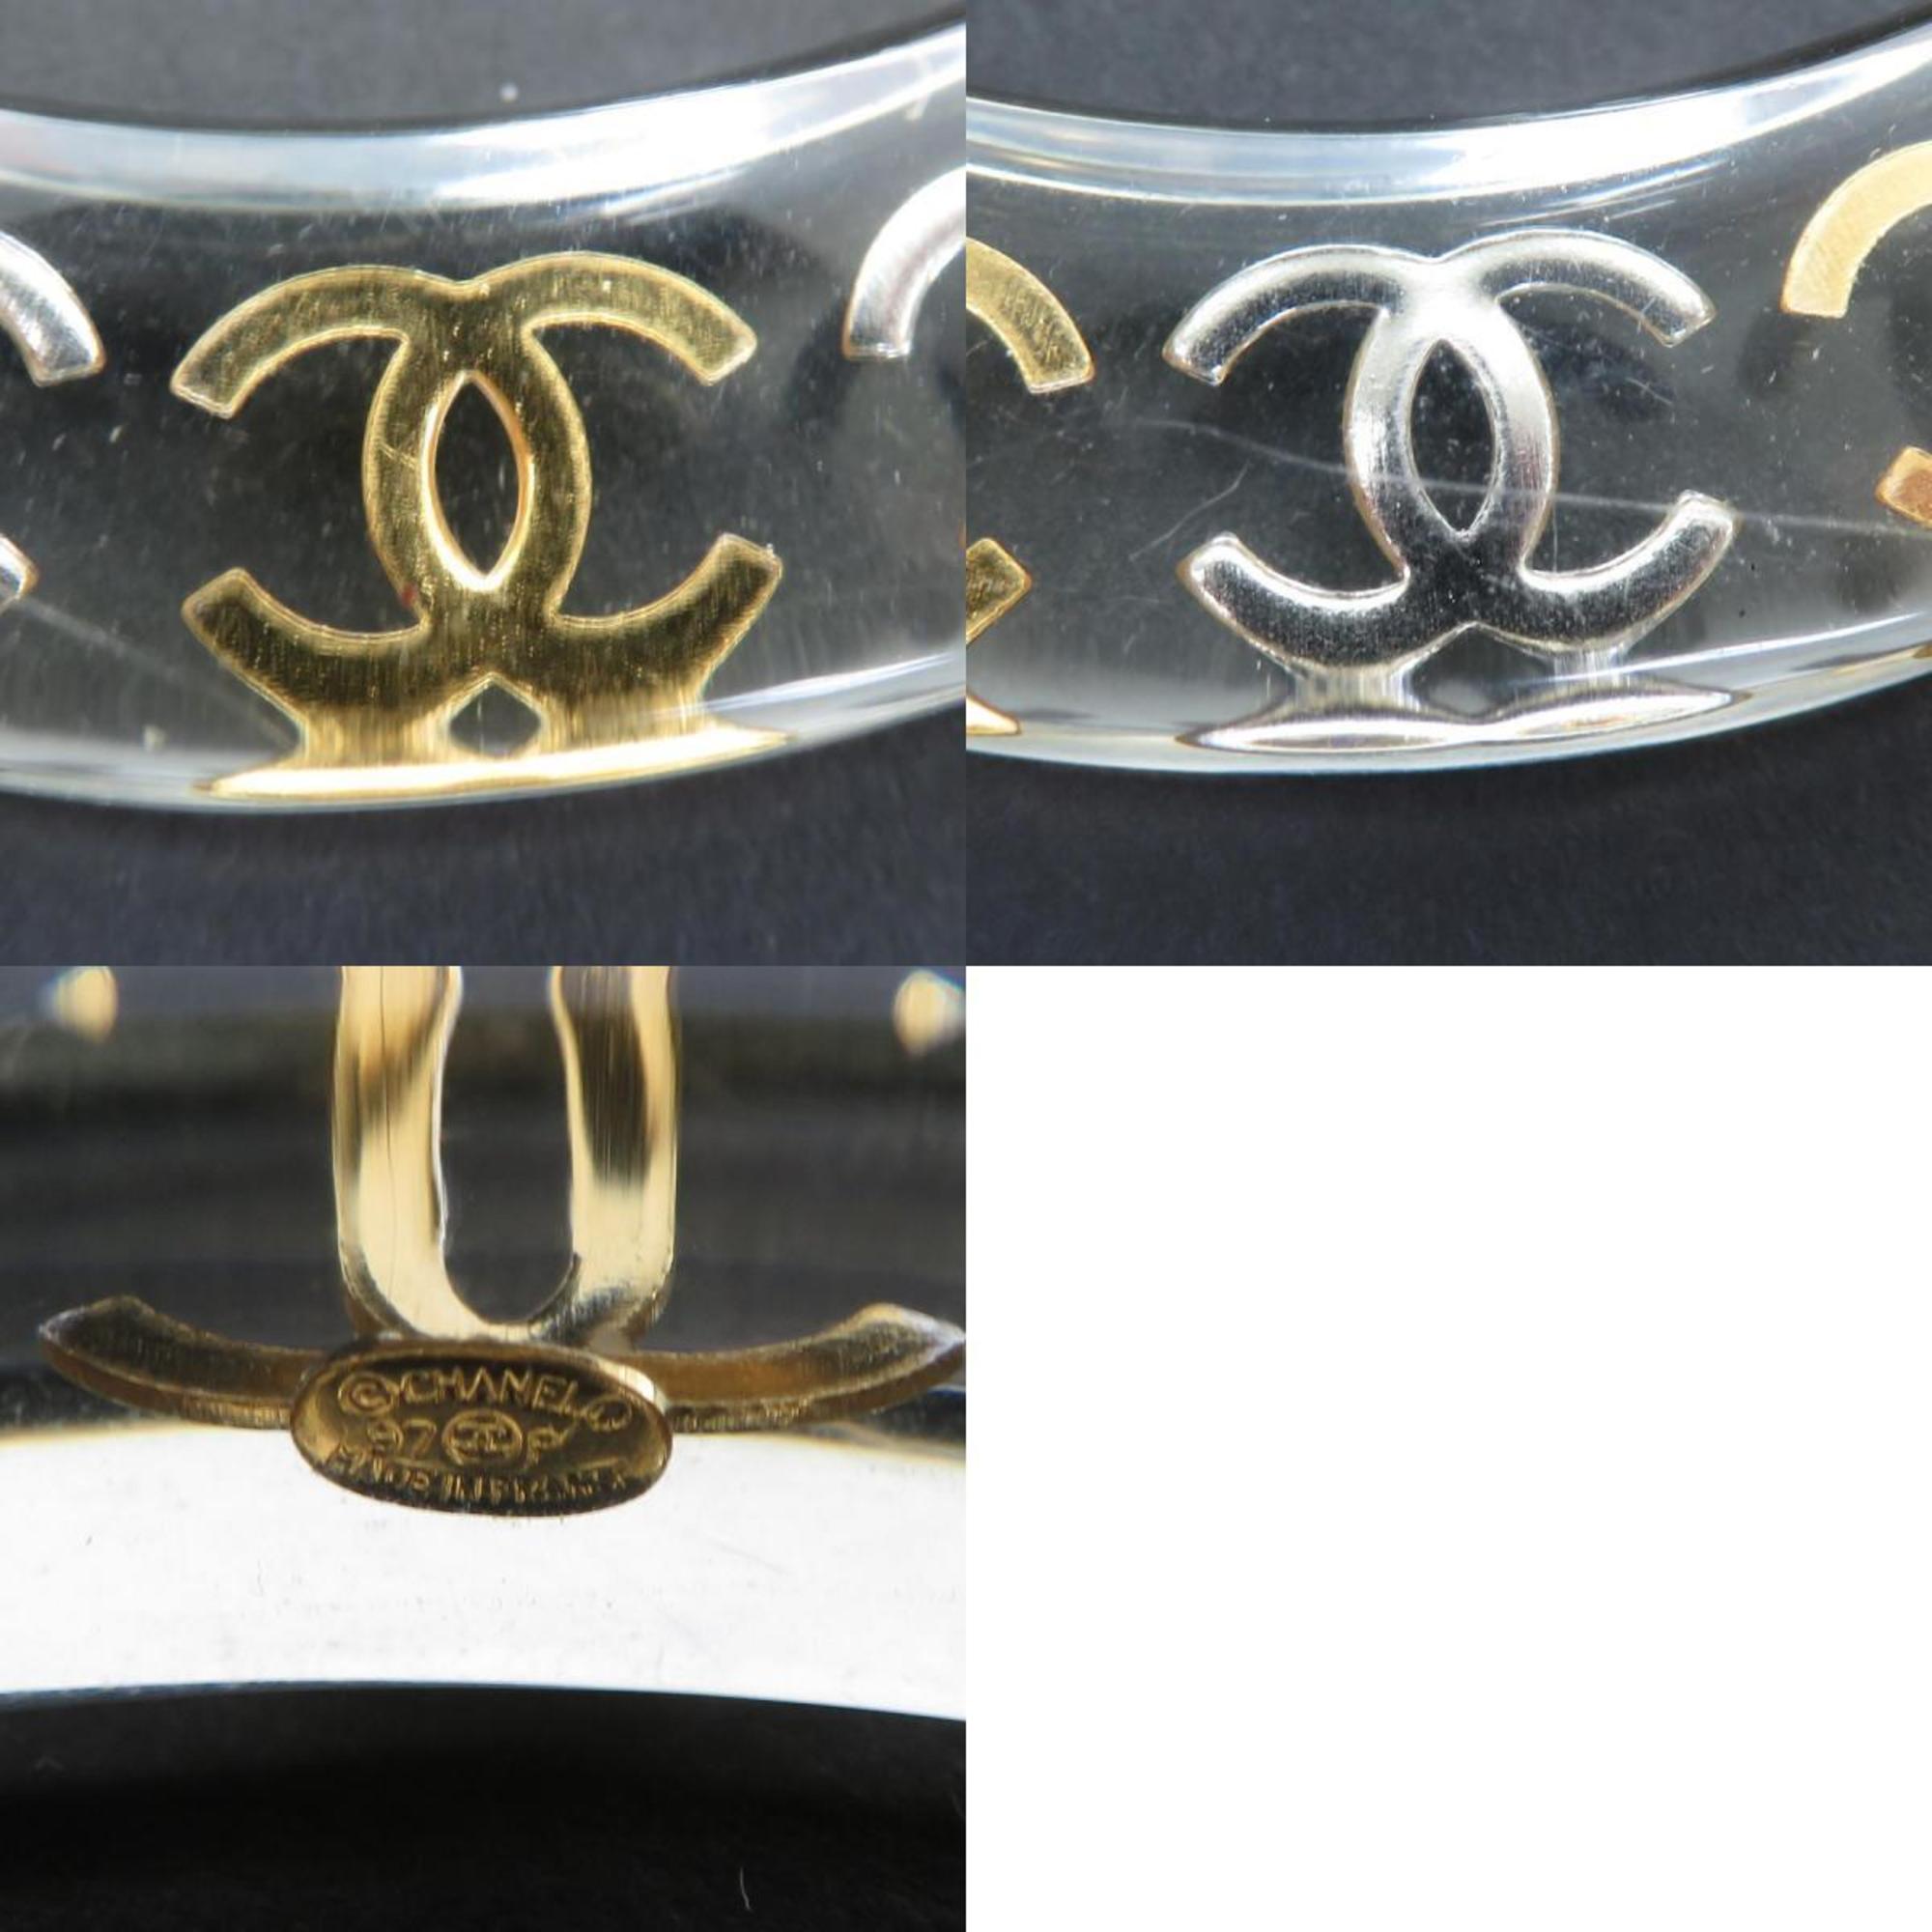 CHANEL bangle bracelet here mark resin/metal clear/gold/silver ladies